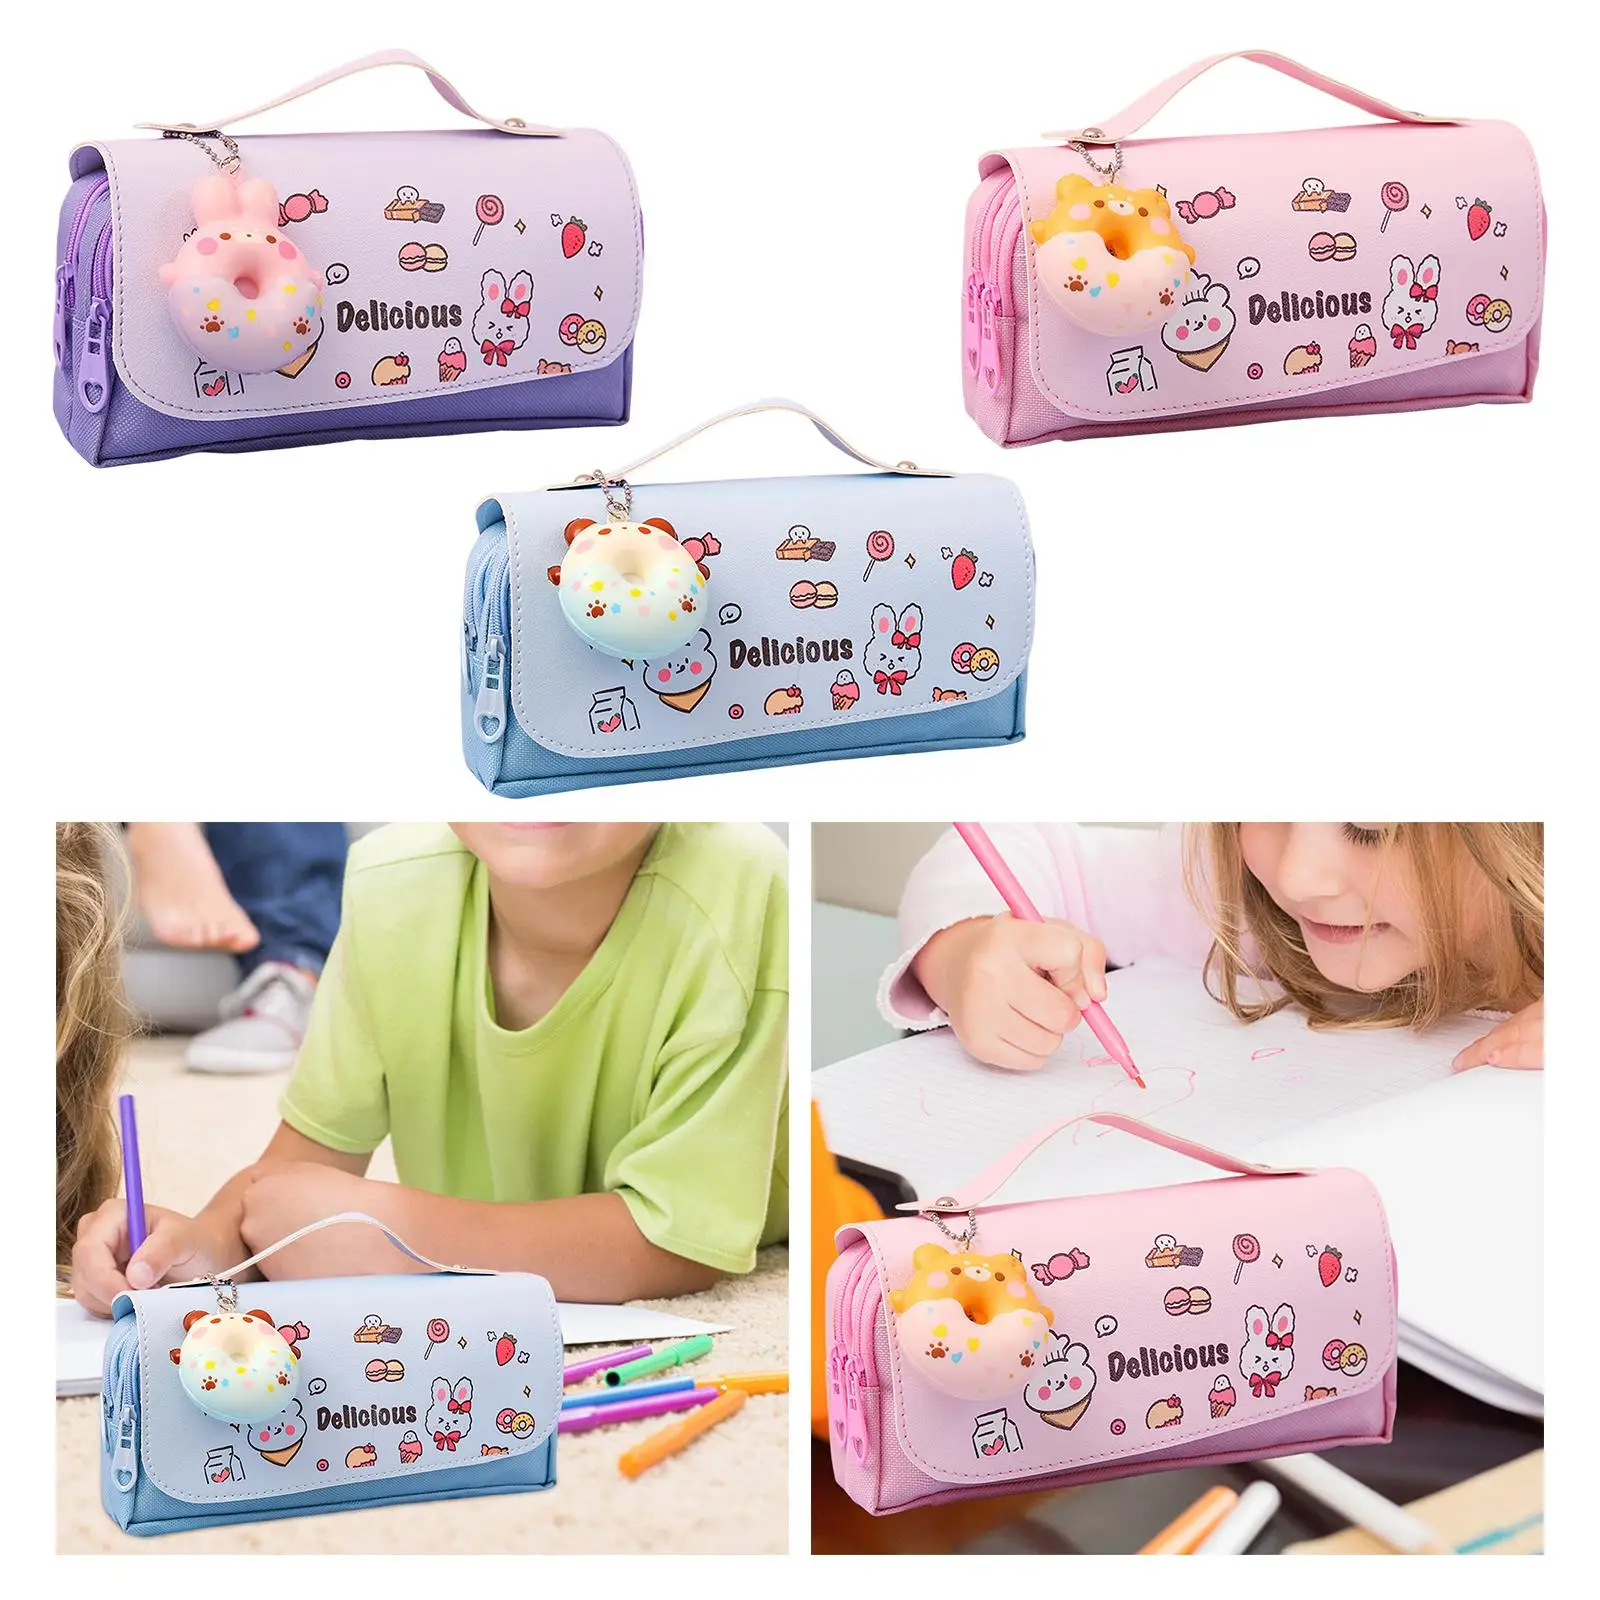 Pencil Case Portable Home Organiser Bag Toiletry Bag Stationery Pouch Bag Pen Pencil Bag for Girls Students Children Adults Kids